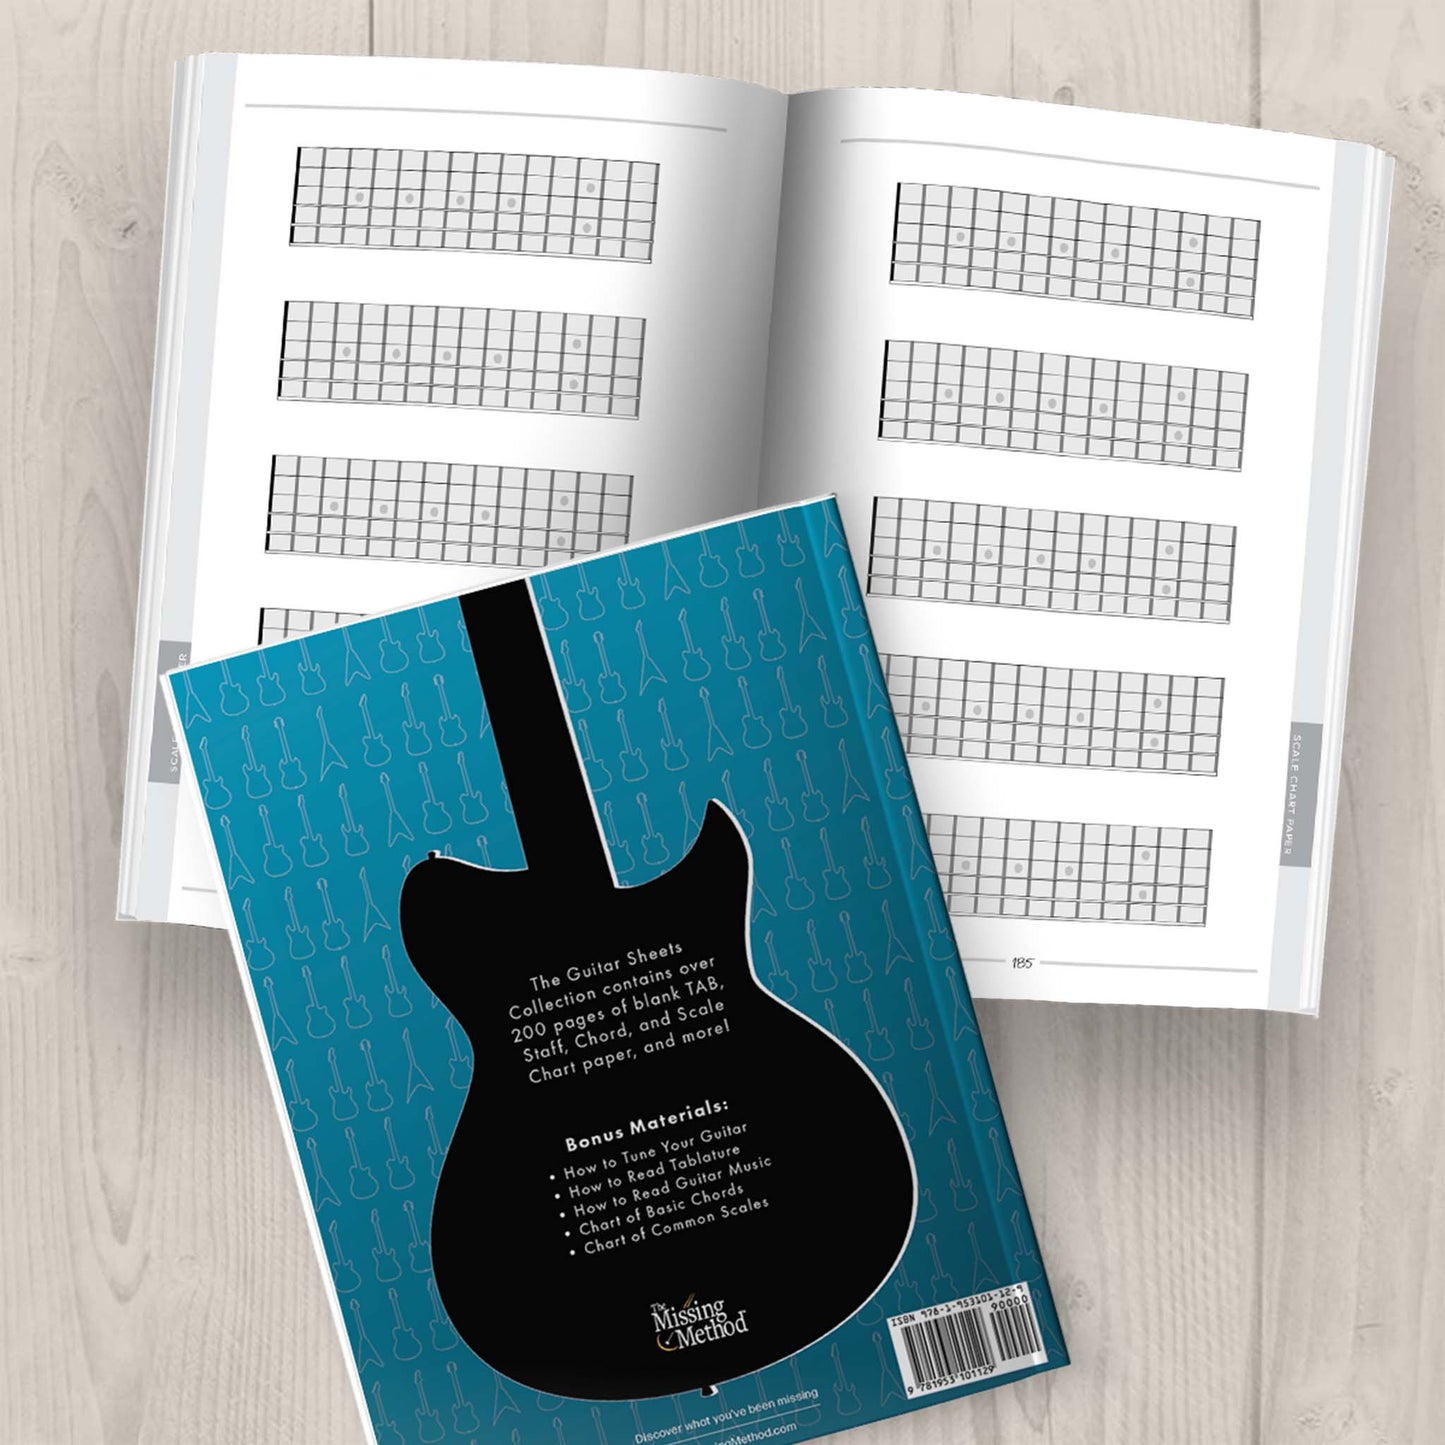 Guitar Sheets Collection Book from The Missing Method for Guitar. Back cover displayed plus open book displaying pages 184-185 of blank scale chart paper.